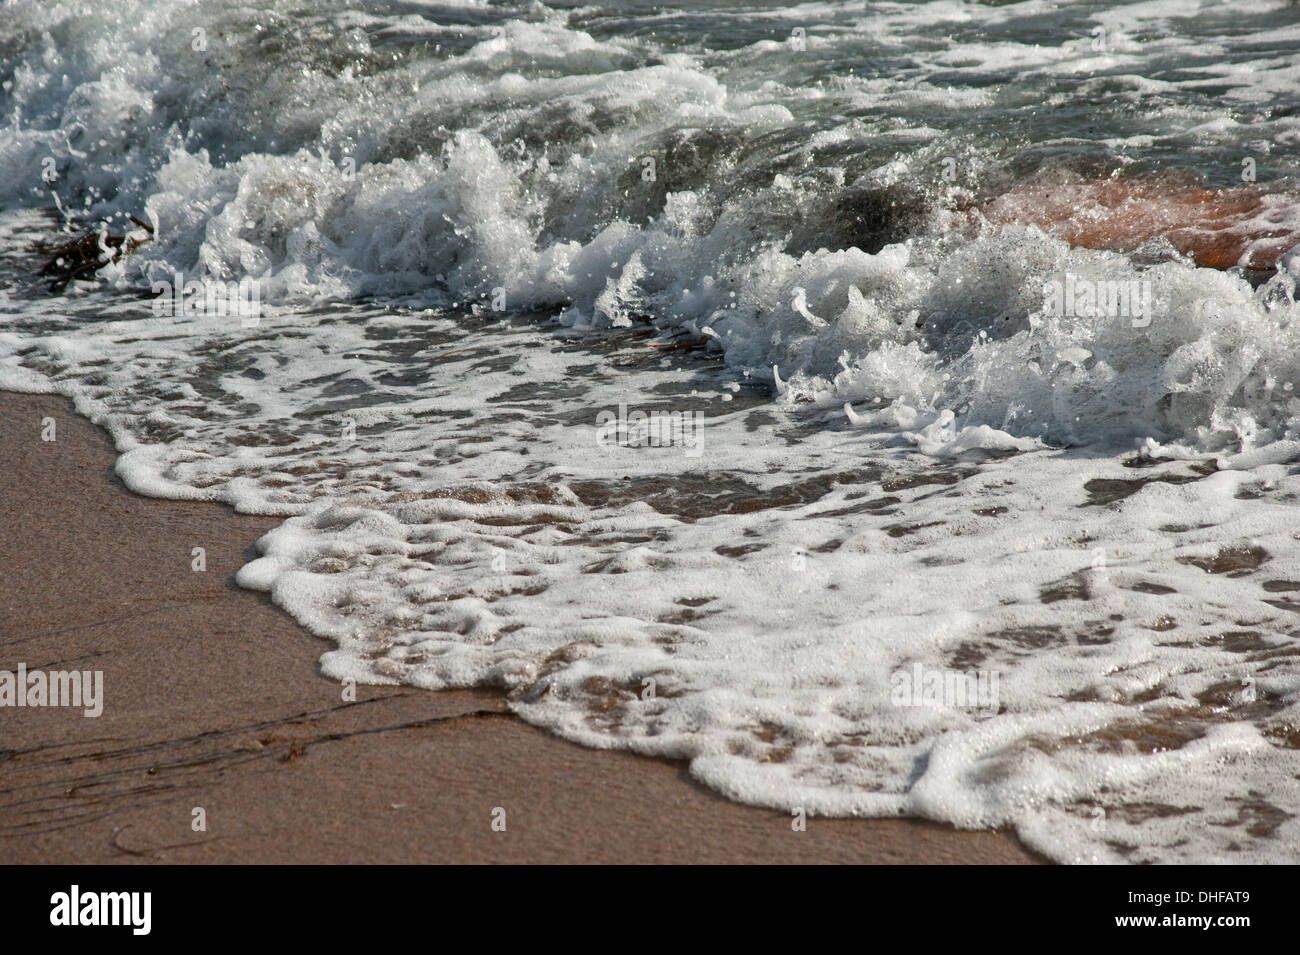 A wave breaking on the shoreline of a sandy beach Stock Photo